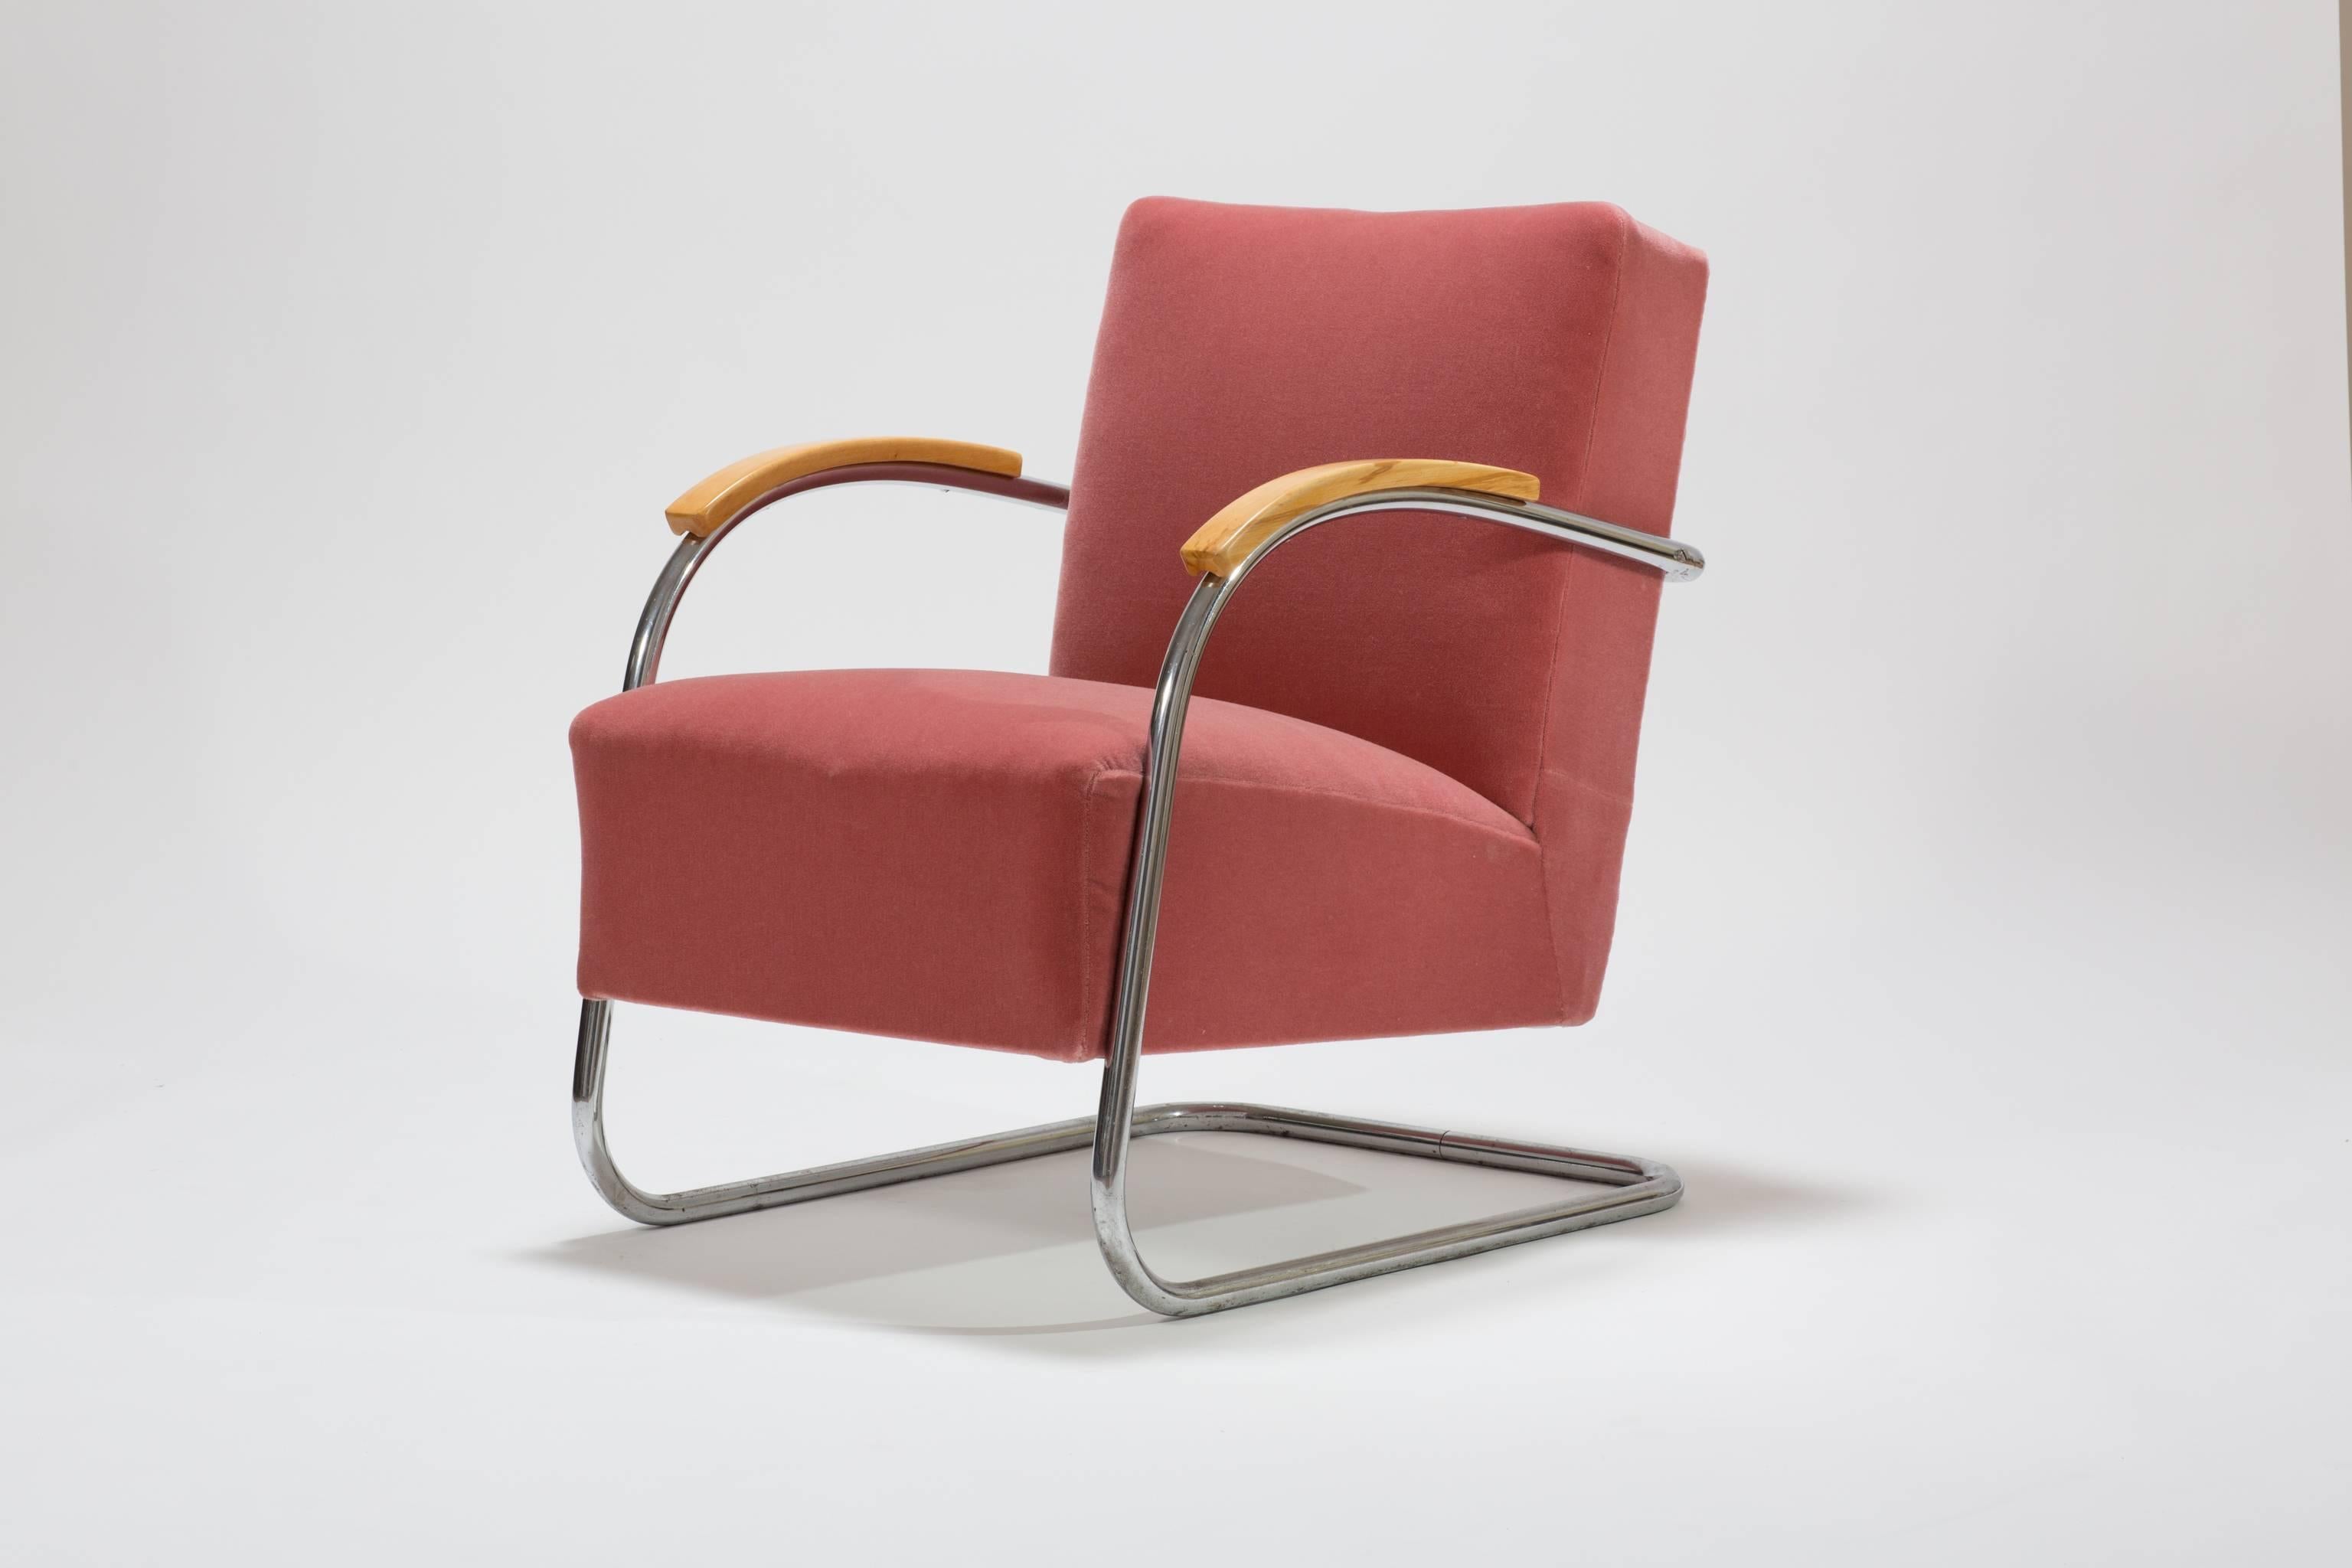 A pair of original tubular steel armchairs from the 1930s. The cantilever armchairs are typical for the German and Austrian Bauhaus Era. The Armchairs have a tubular steel frame and are upholstered with a Rose Mohair fabric.
The original armrests